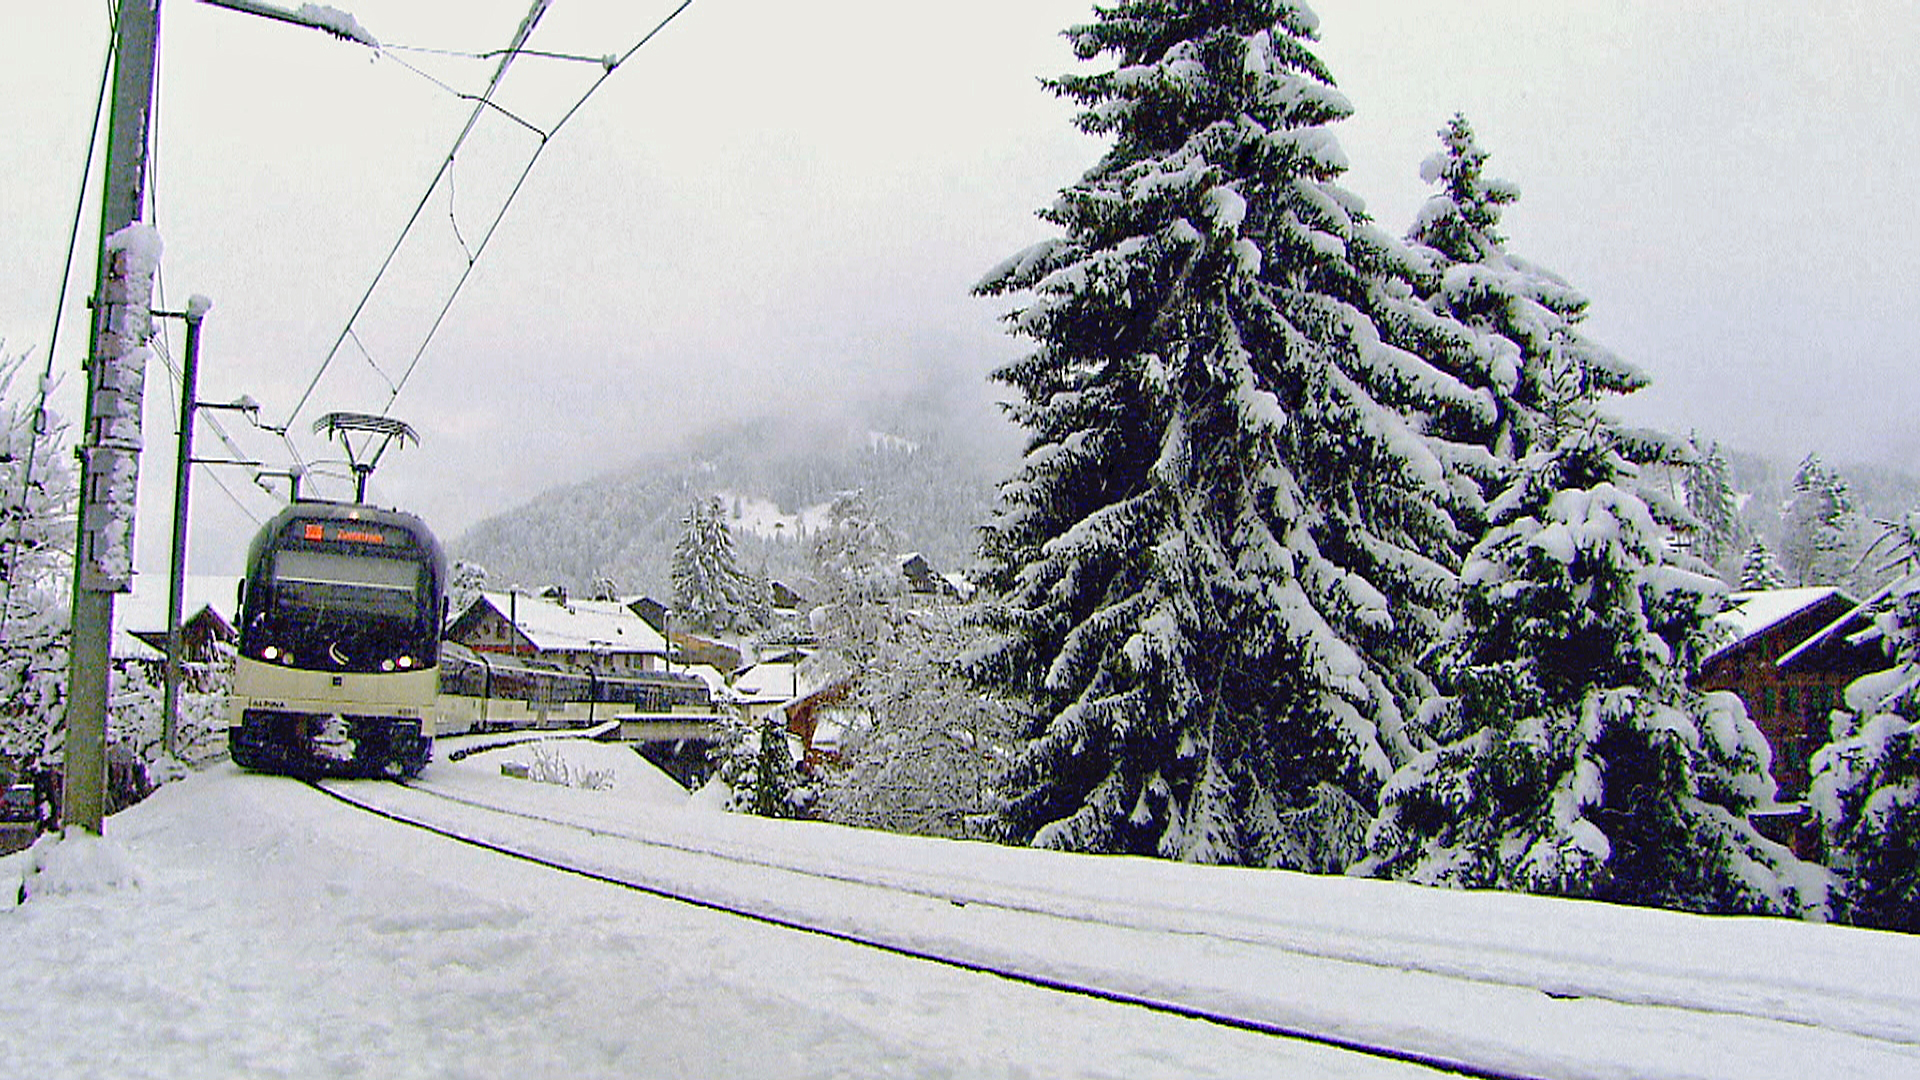 Golden Pass Train at Gstaad